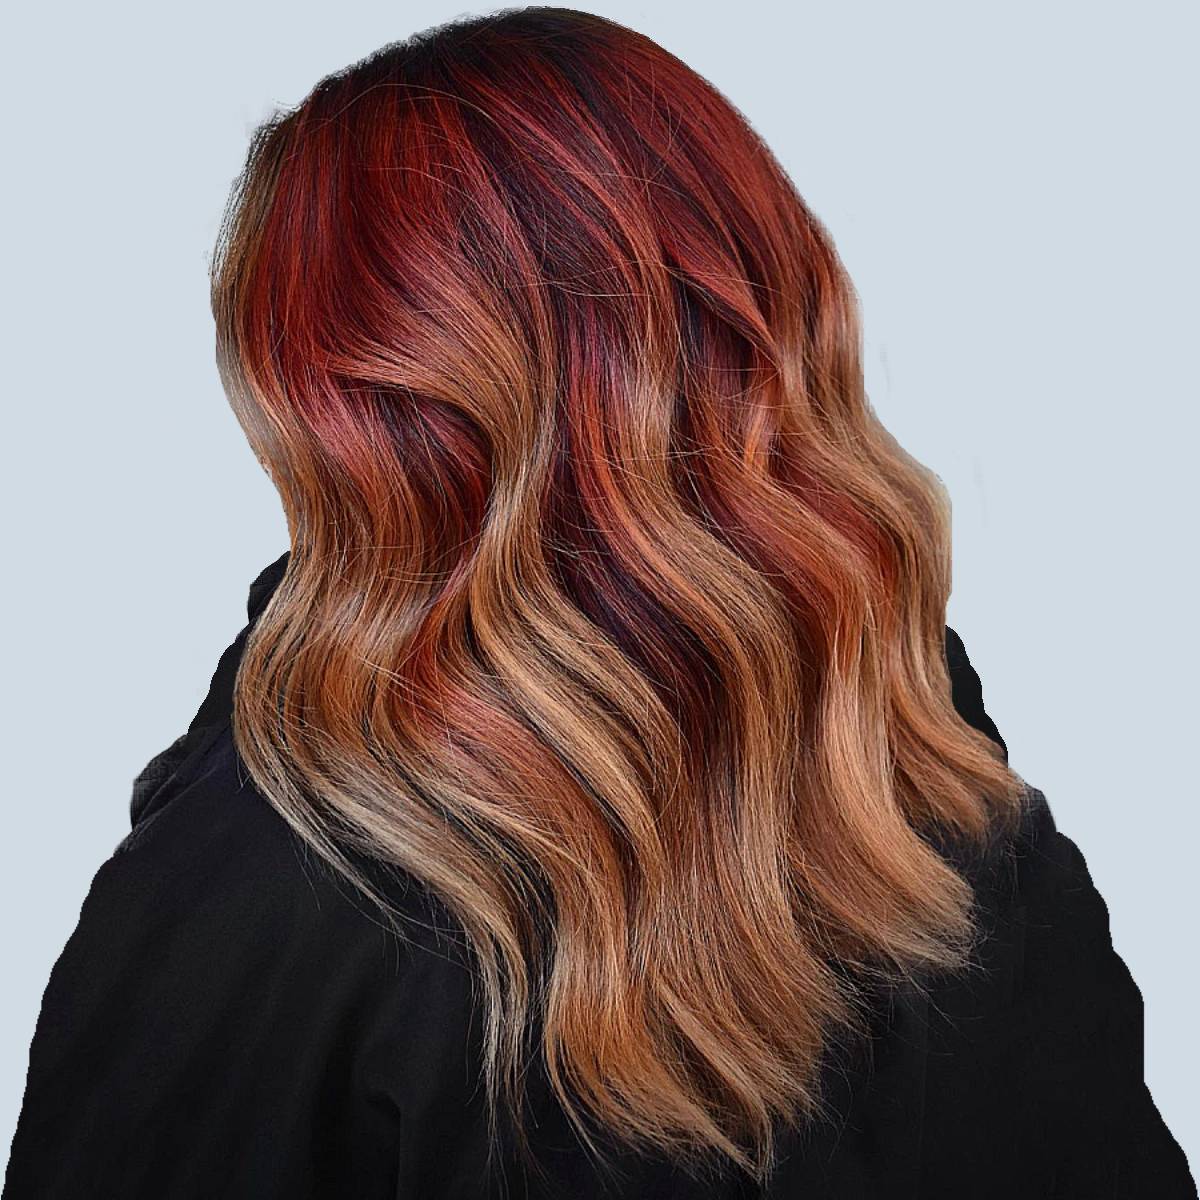 https://content.latest-hairstyles.com/wp-content/uploads/red-and-blonde-hair-x1.jpg